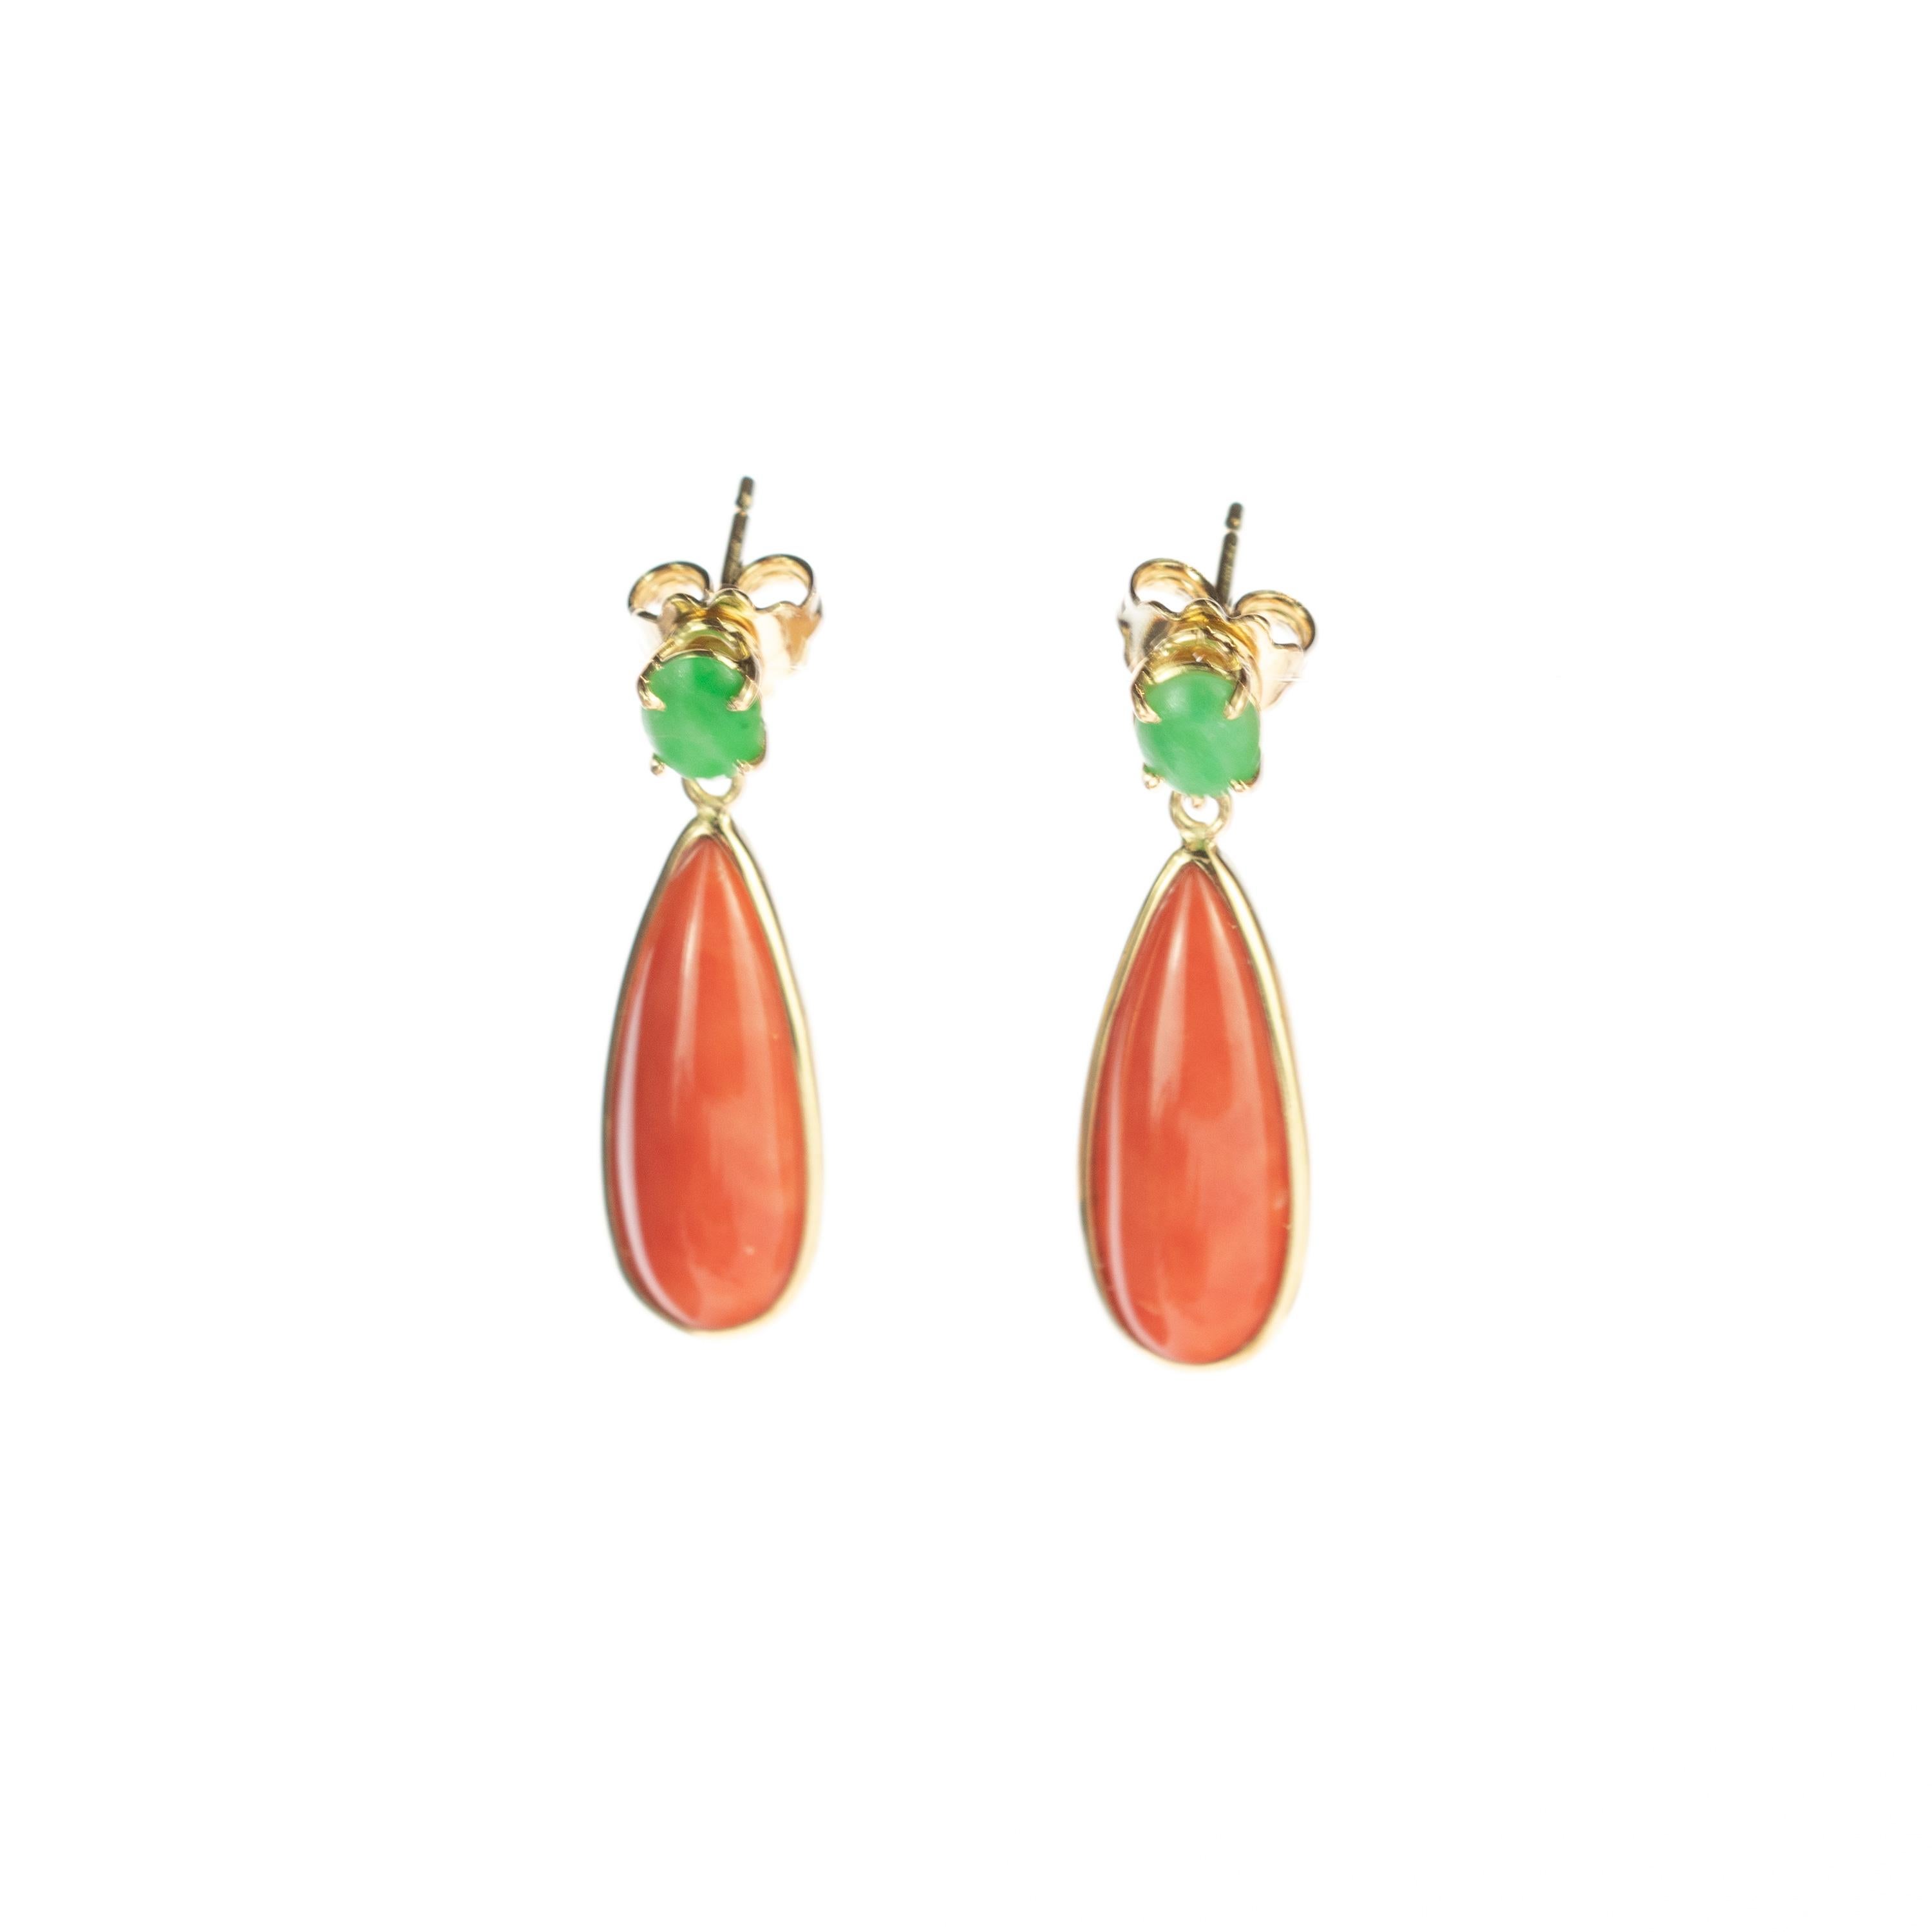 Magnificent cammeo salmon coral and natural jade earrings surrounded by delicate 18 karat yellow gold details. Evoking all the italian tradition resulting in a stunning masterpiece with an outstanding display of color and a high quality